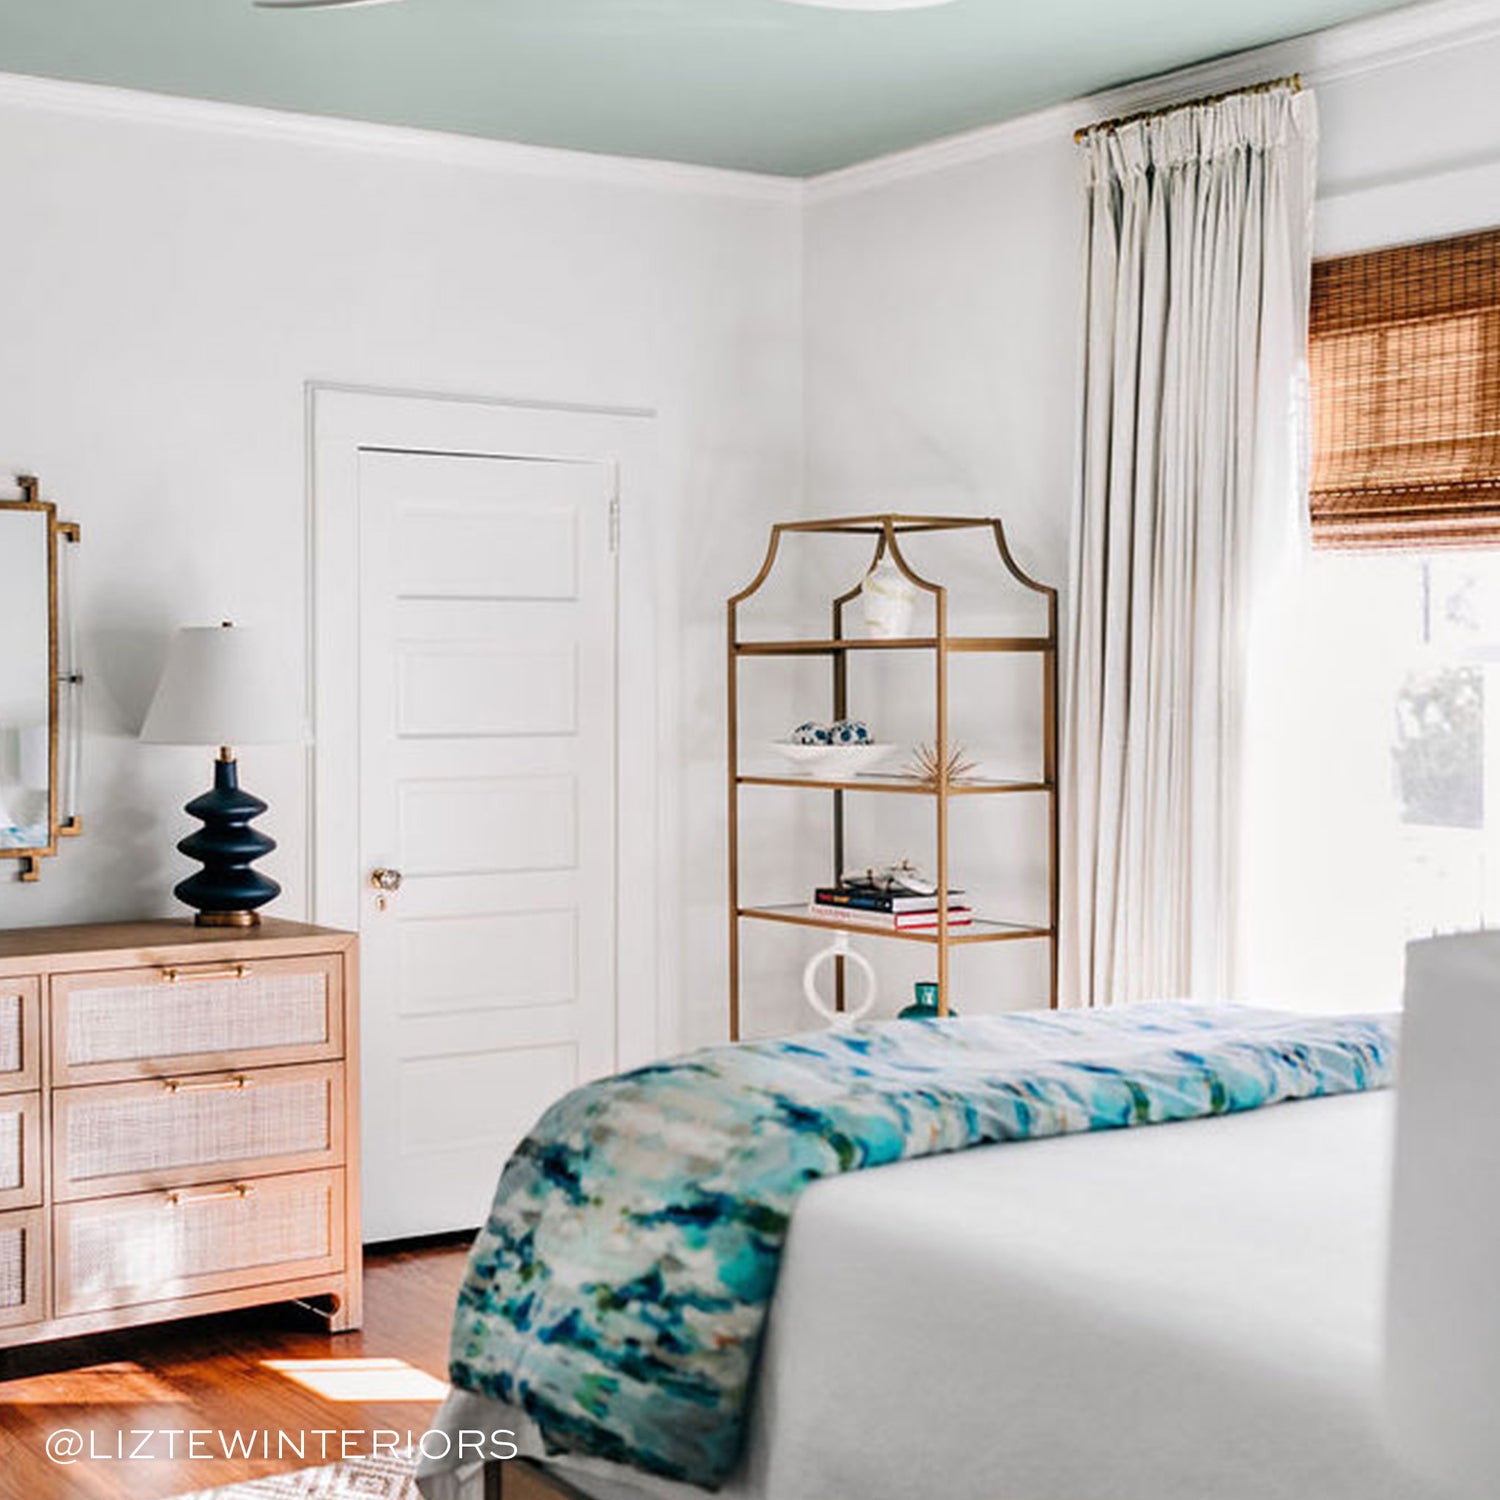 Bedroom styled with Moss Green Geometric Printed Curtains on illuminated window by white bed and wooden dresser in front. Photo taken by Liz Tew Interiors